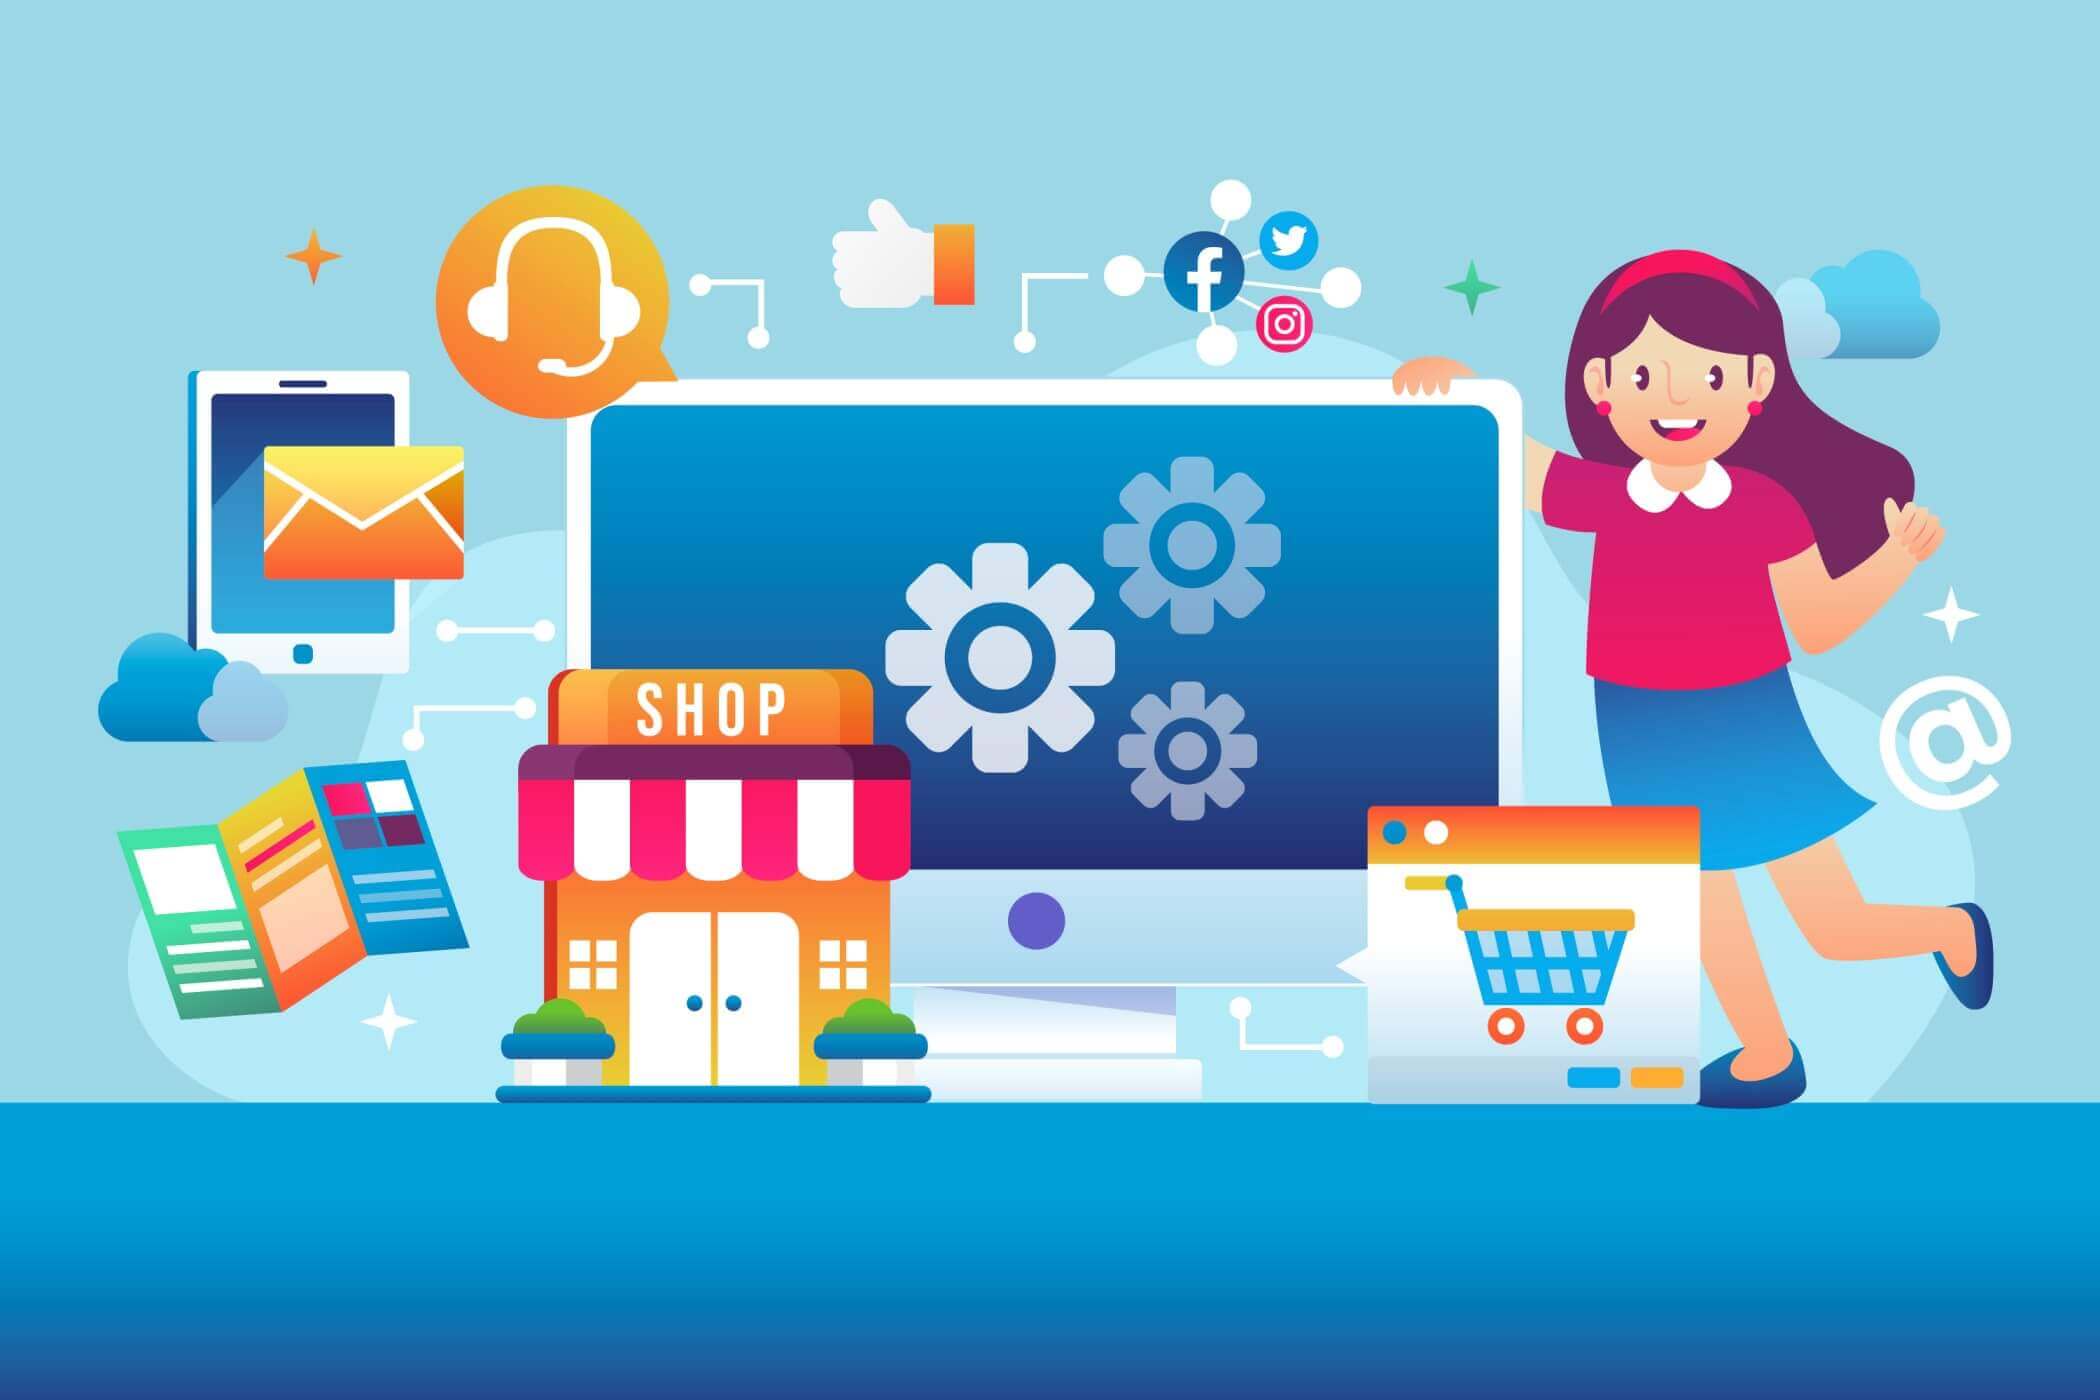 How do you enhance Your E-Commerce Store with the Help of a Shopify Expert